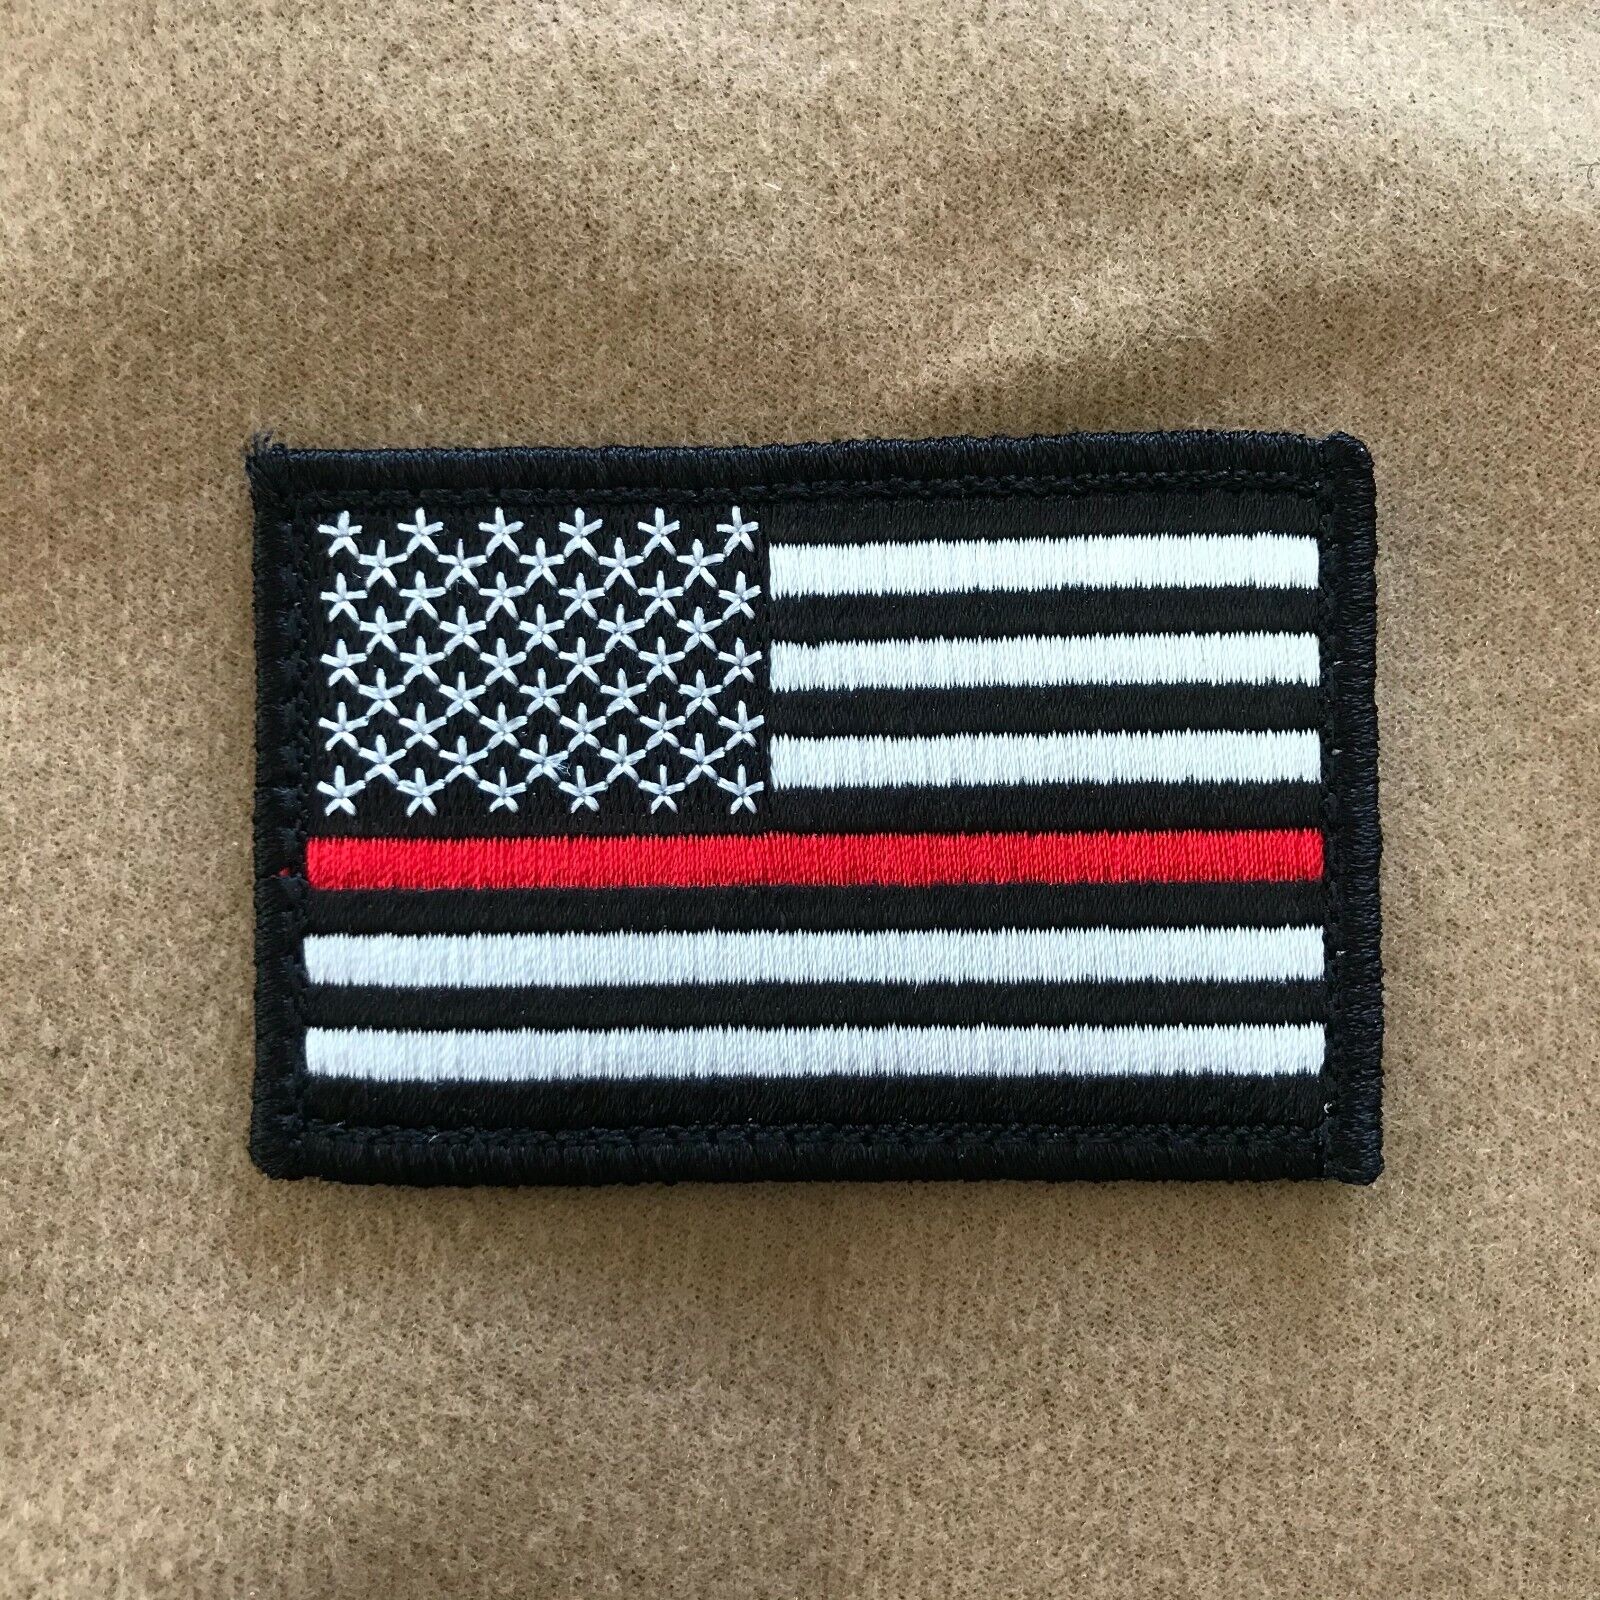 THIN RED LINE FLAG MORALE PATCH FIREMAN FIREFIGHTER HALLIGAN CAIRNS FDNY LAFD FD